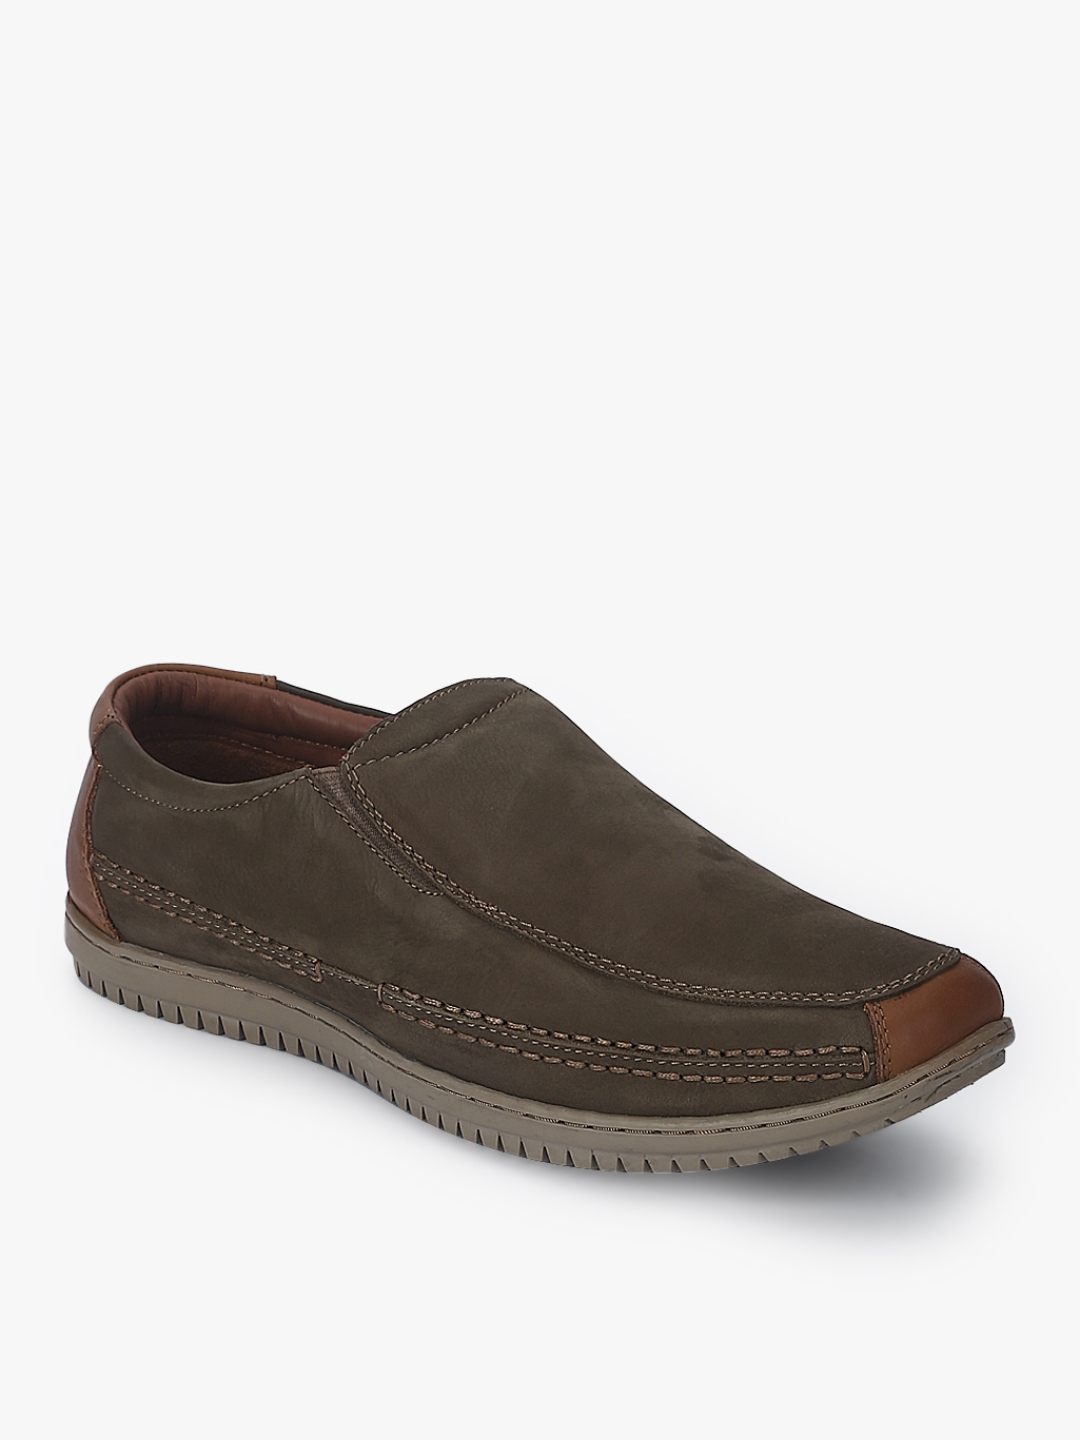 Buy Olive Loafers - Casual Shoes for Men 7686389 | Myntra